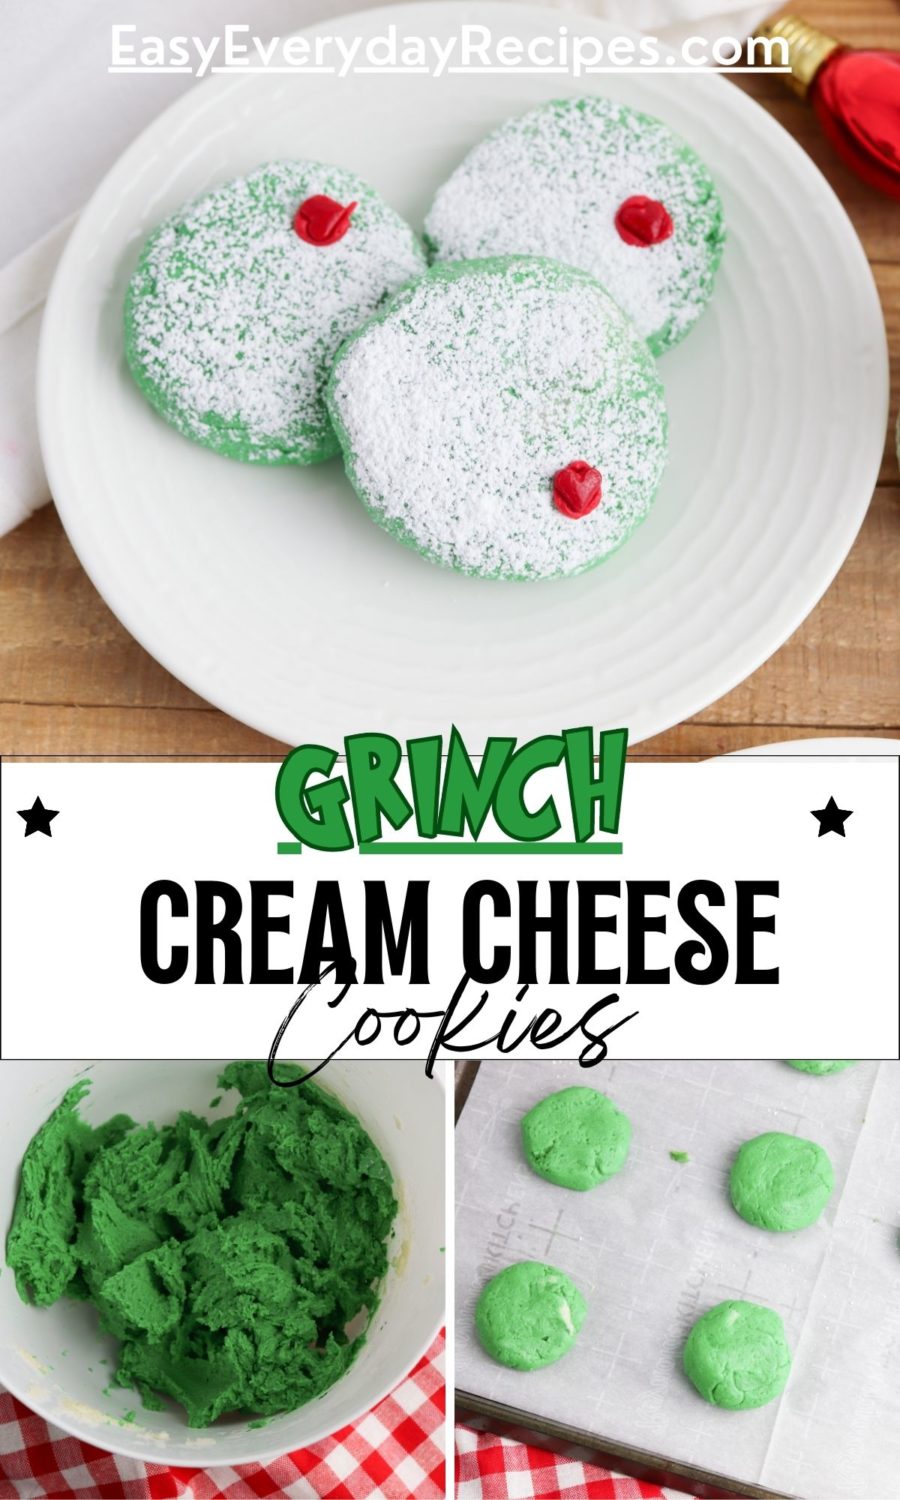 Grinch cream cheese cookies.